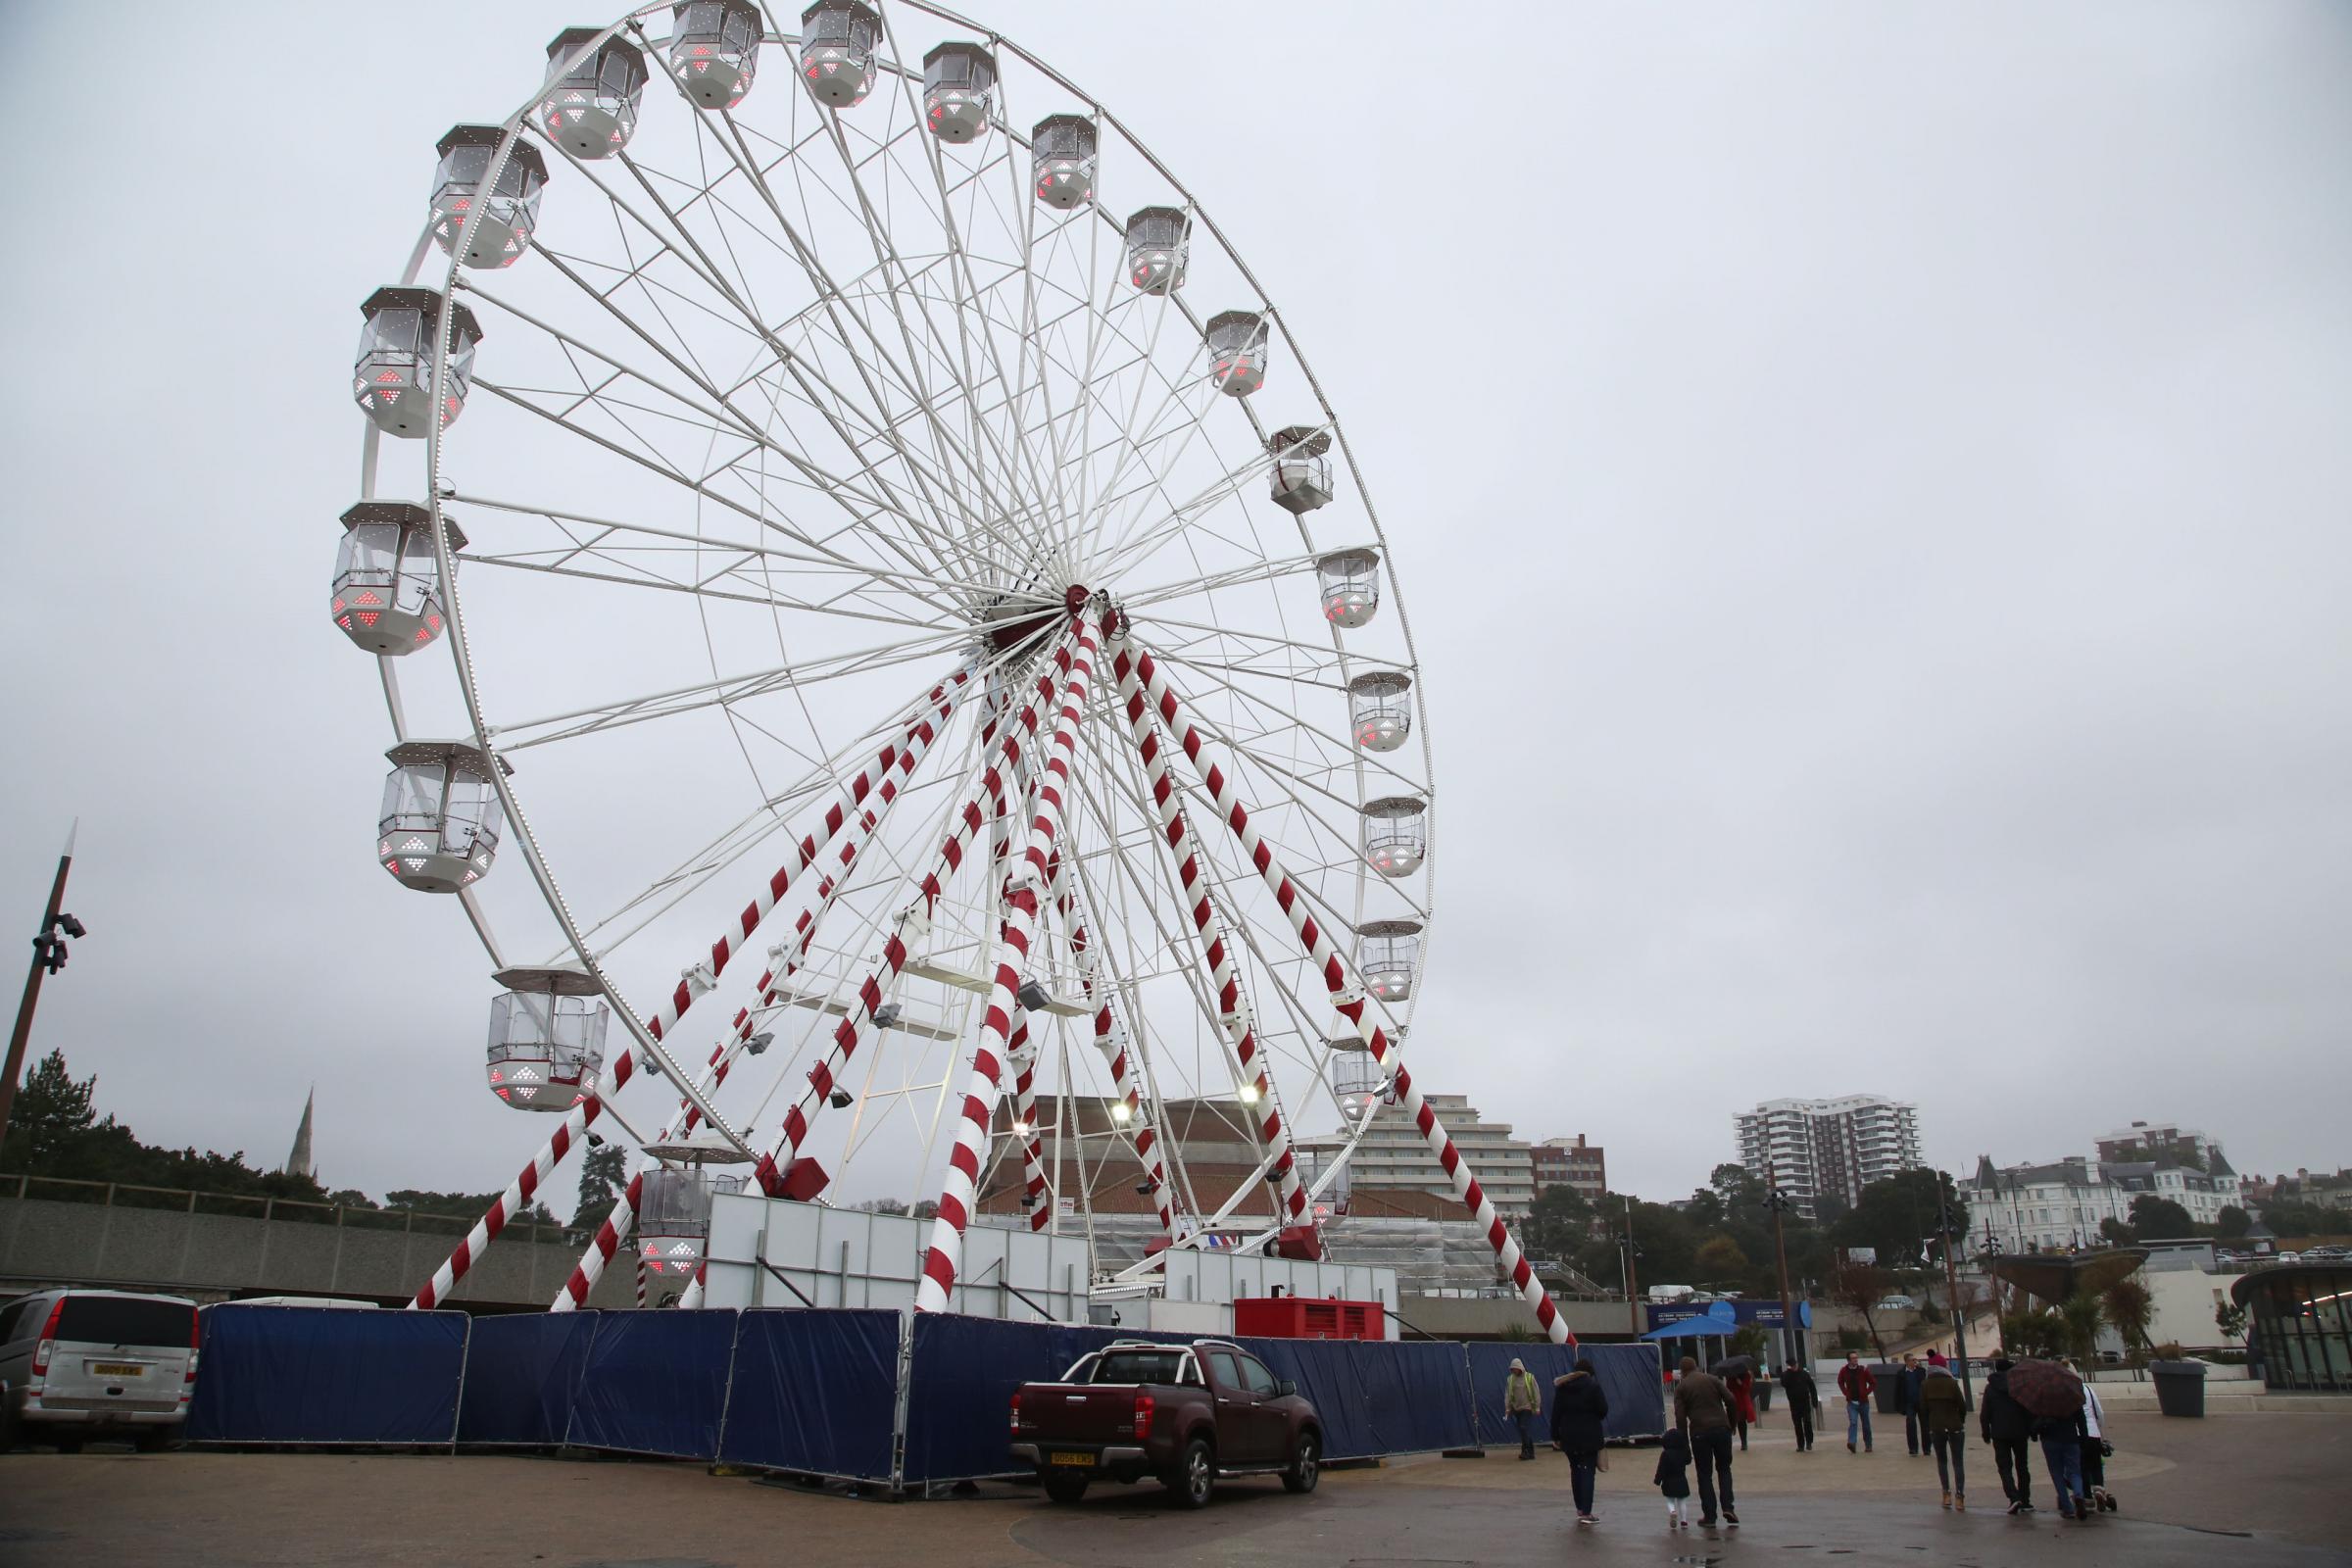 The Big Wheel is back (and this time it’s staying even longer)